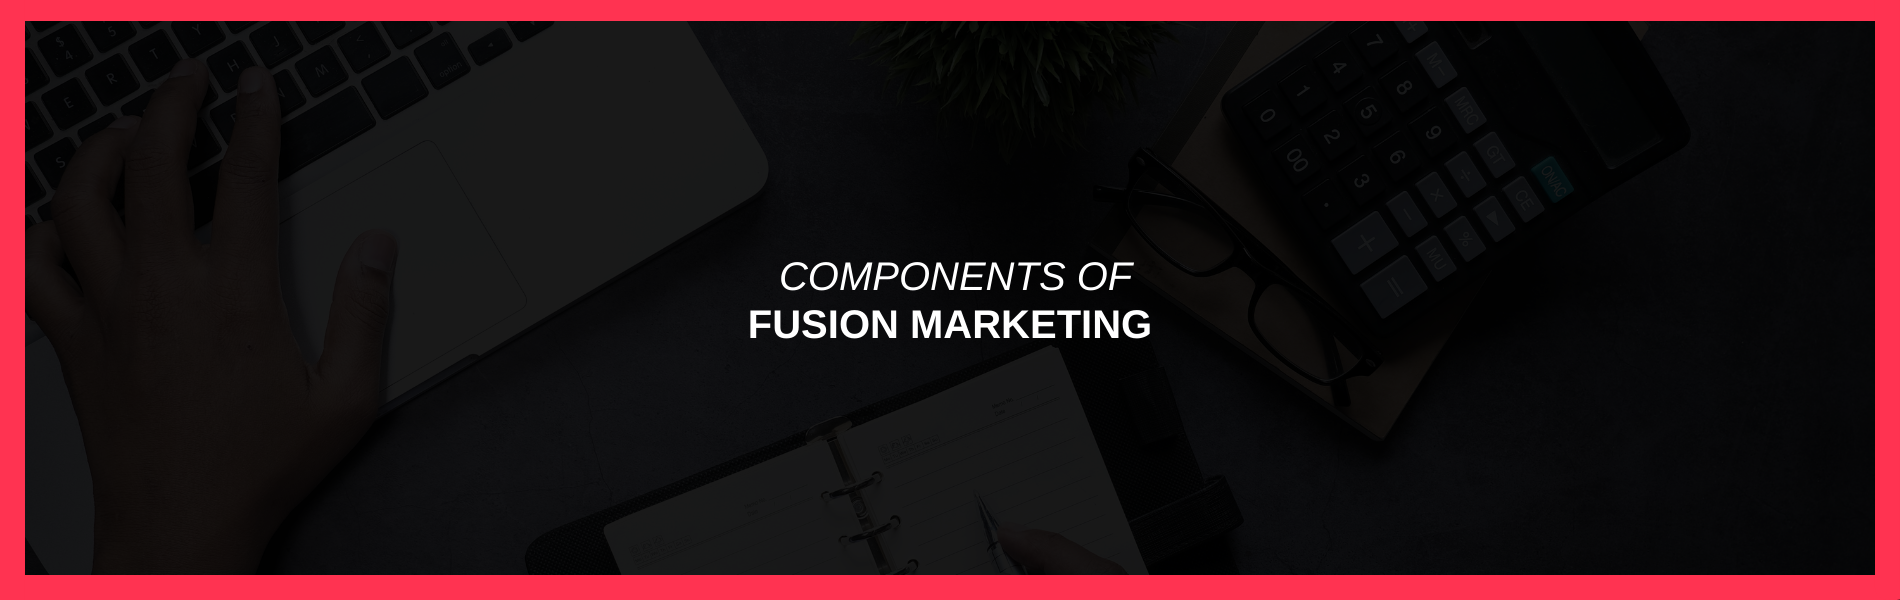 Components of Fusion Marketing